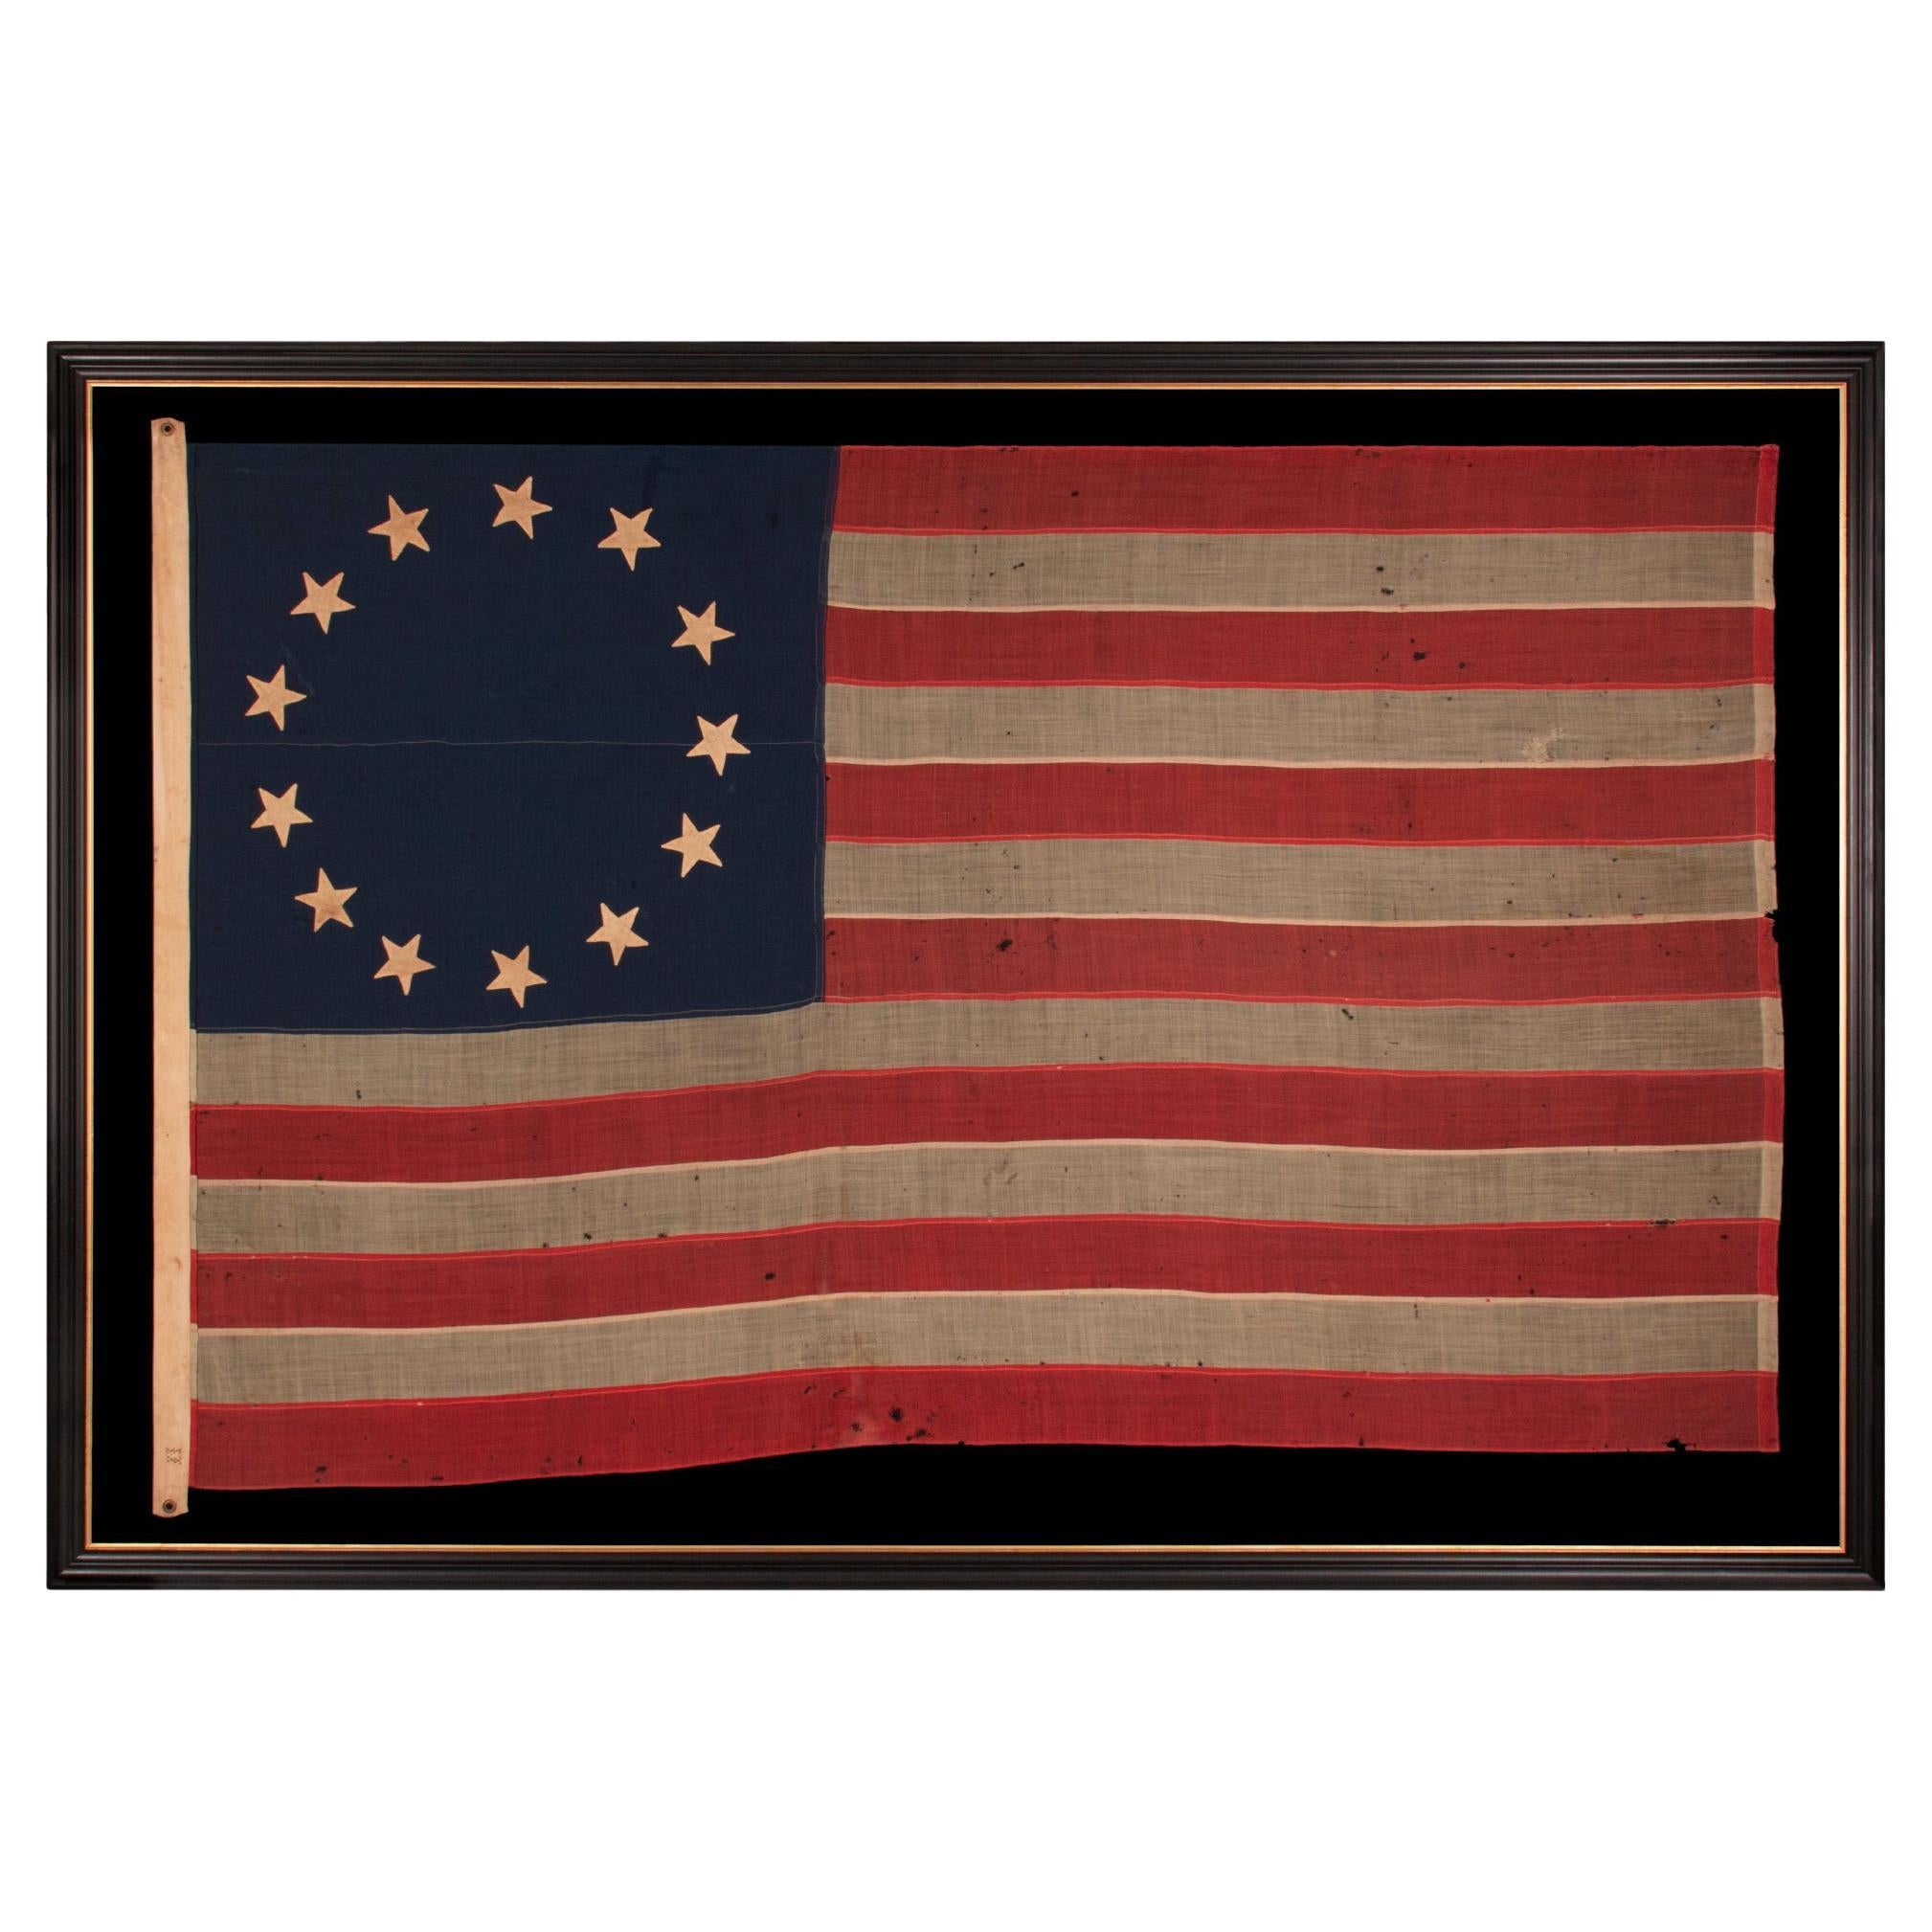 13 Star Antique American Flag in the Betsy Ross Pattern, ca 1861-1865